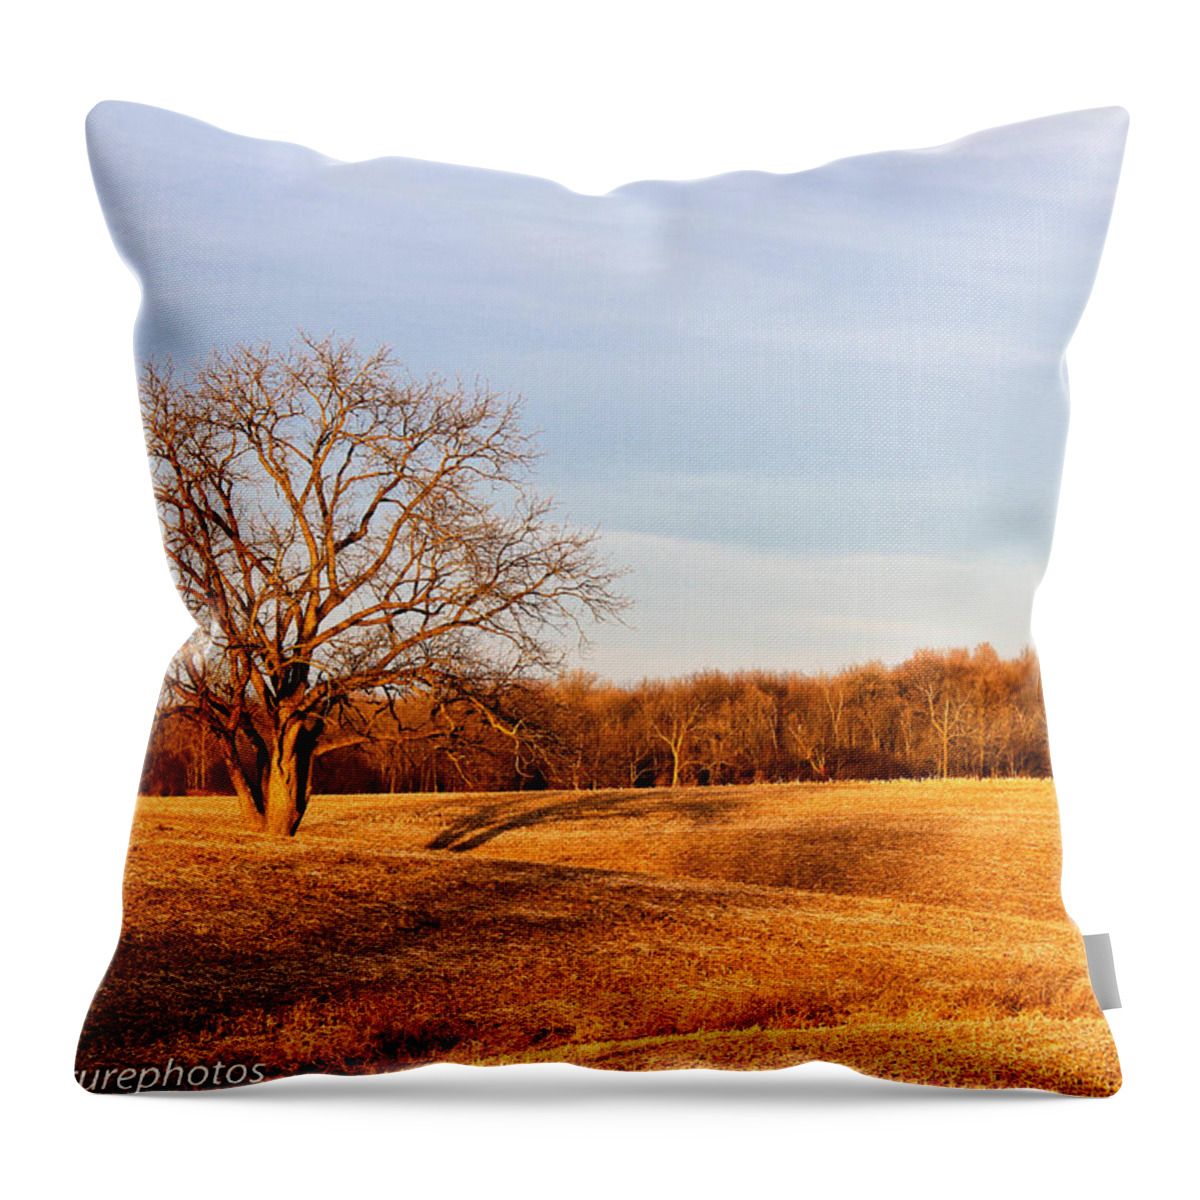 Golden Hour Tree And Shadows Throw Pillow featuring the photograph Golden Hour shadows by Rachel Cohen